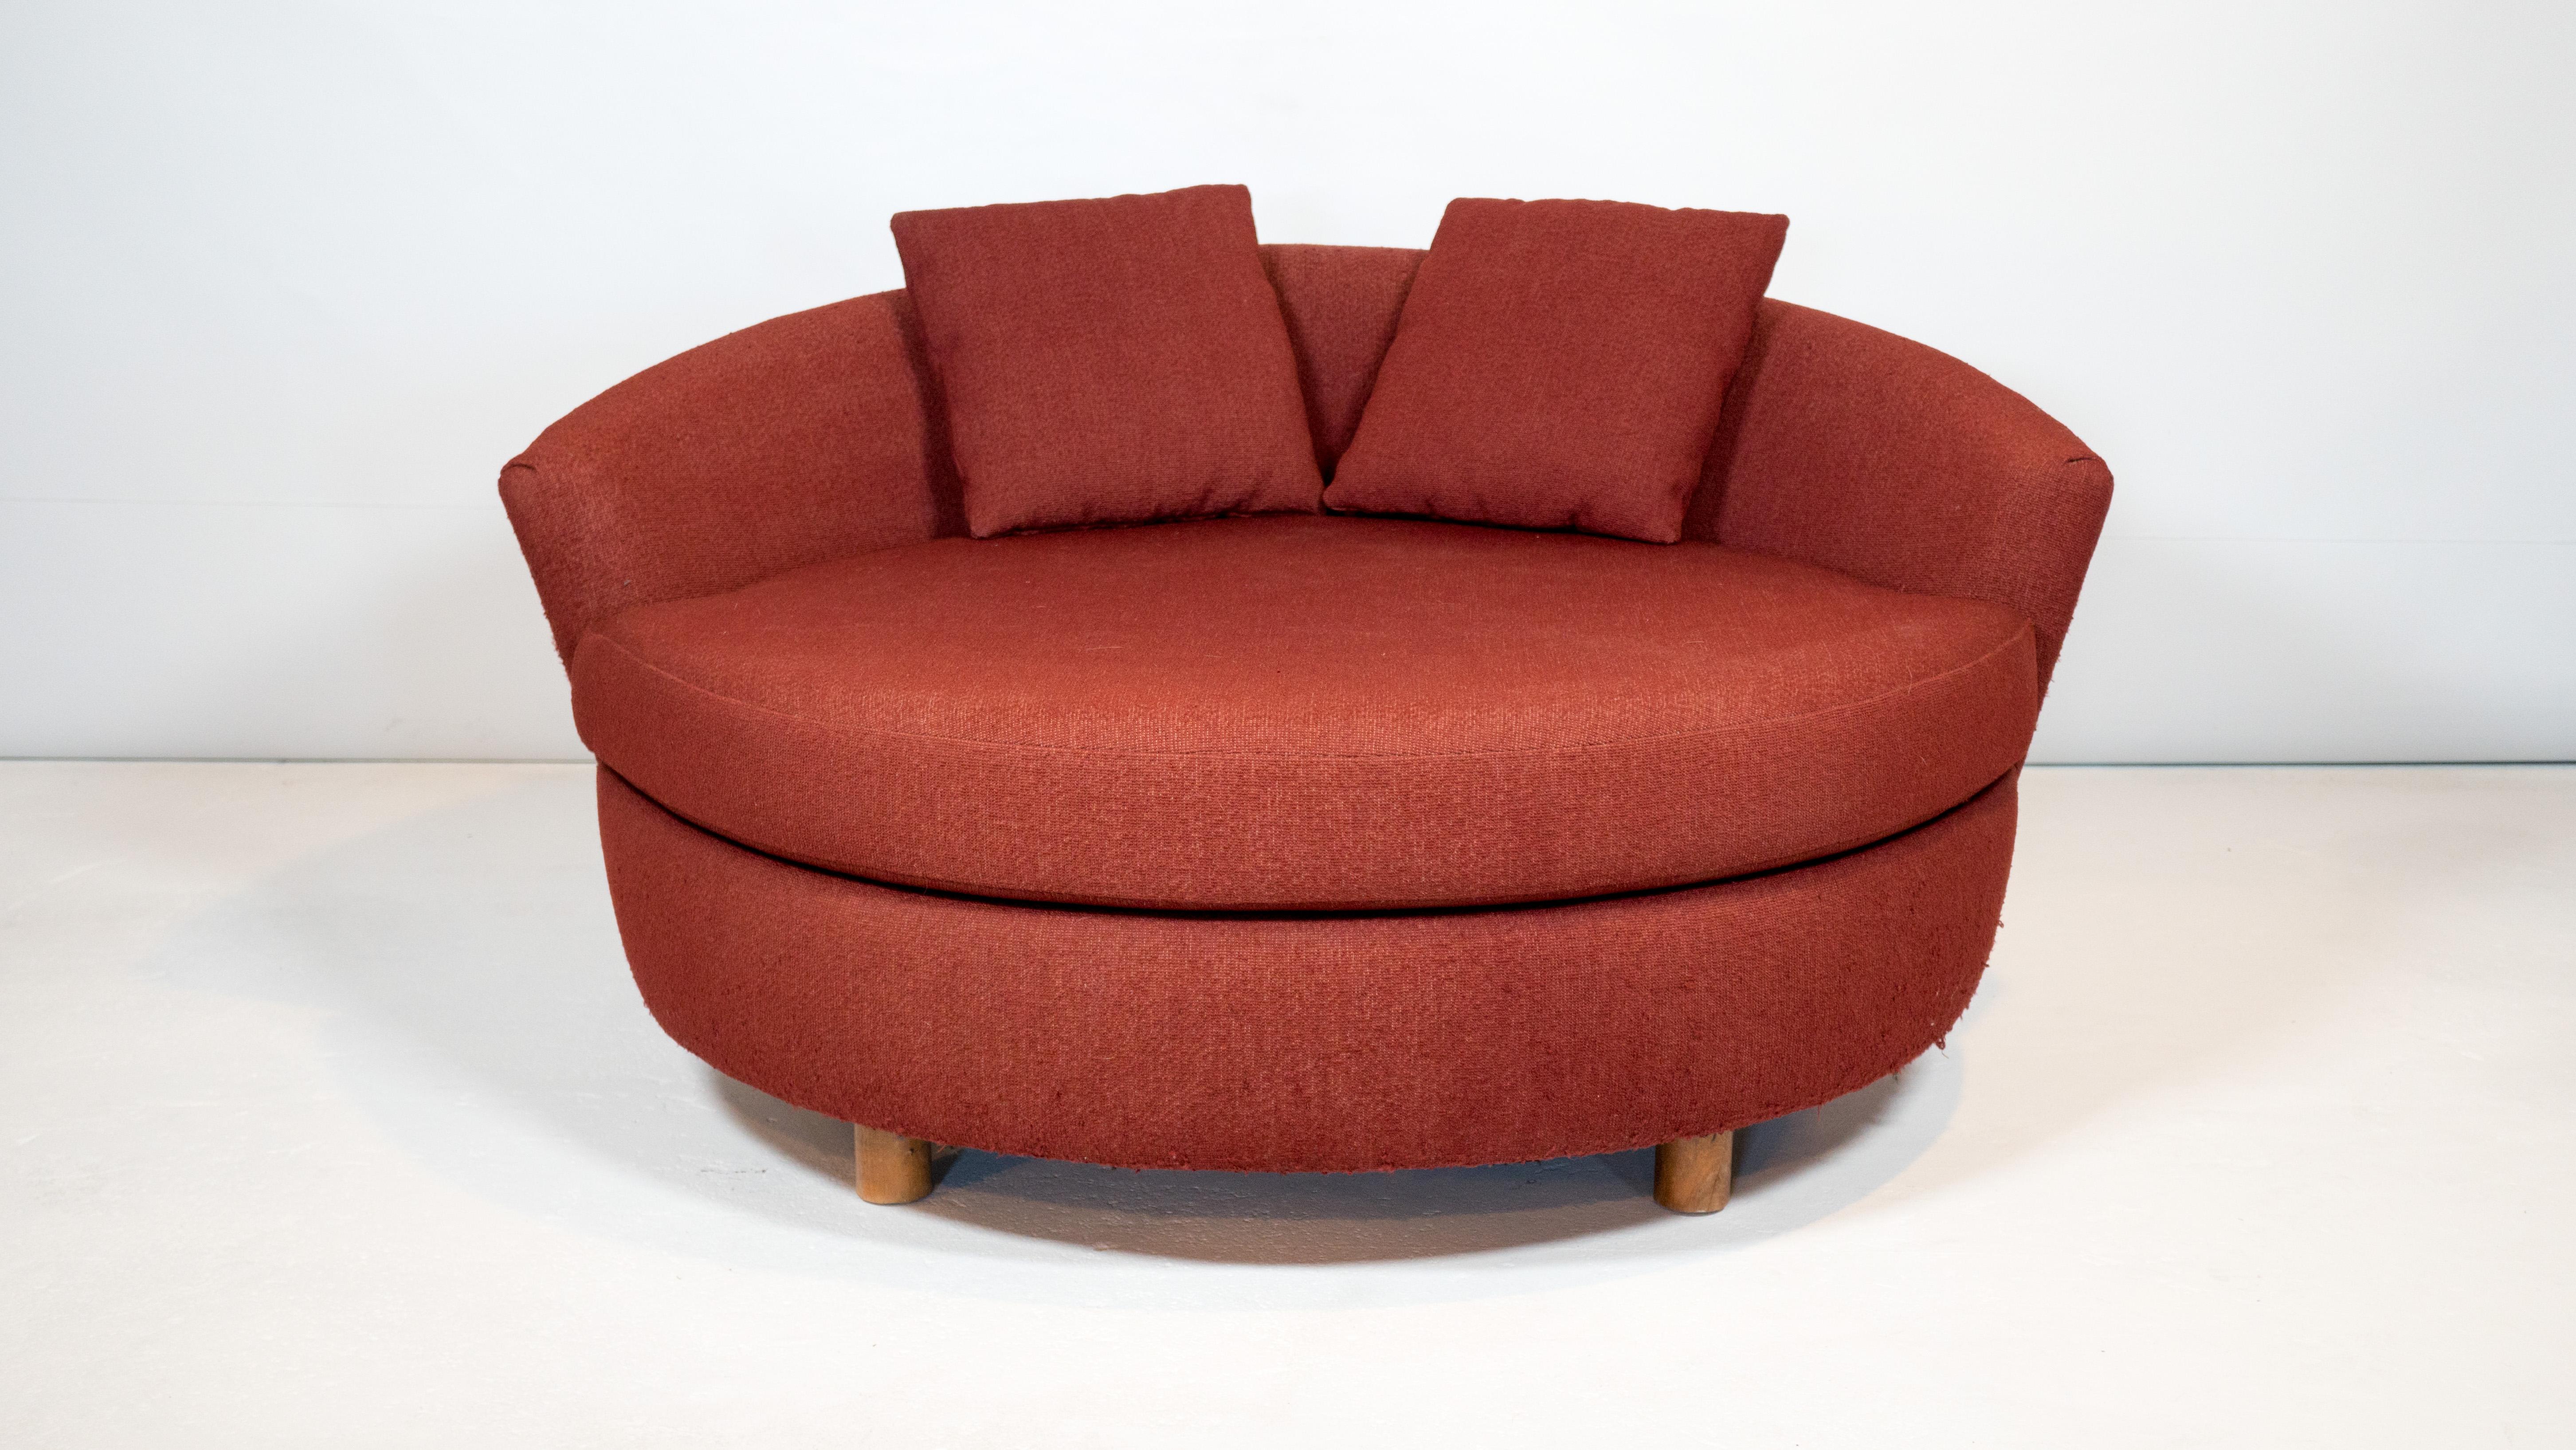 Lovely vintage round satellite lounge chair in the style of Milo Baughman, circa 1970s. Petite sizing, low profile design. Back rest extends into an armrest which covers 180º of the seat. Supported by four wooden legs, offering a floating